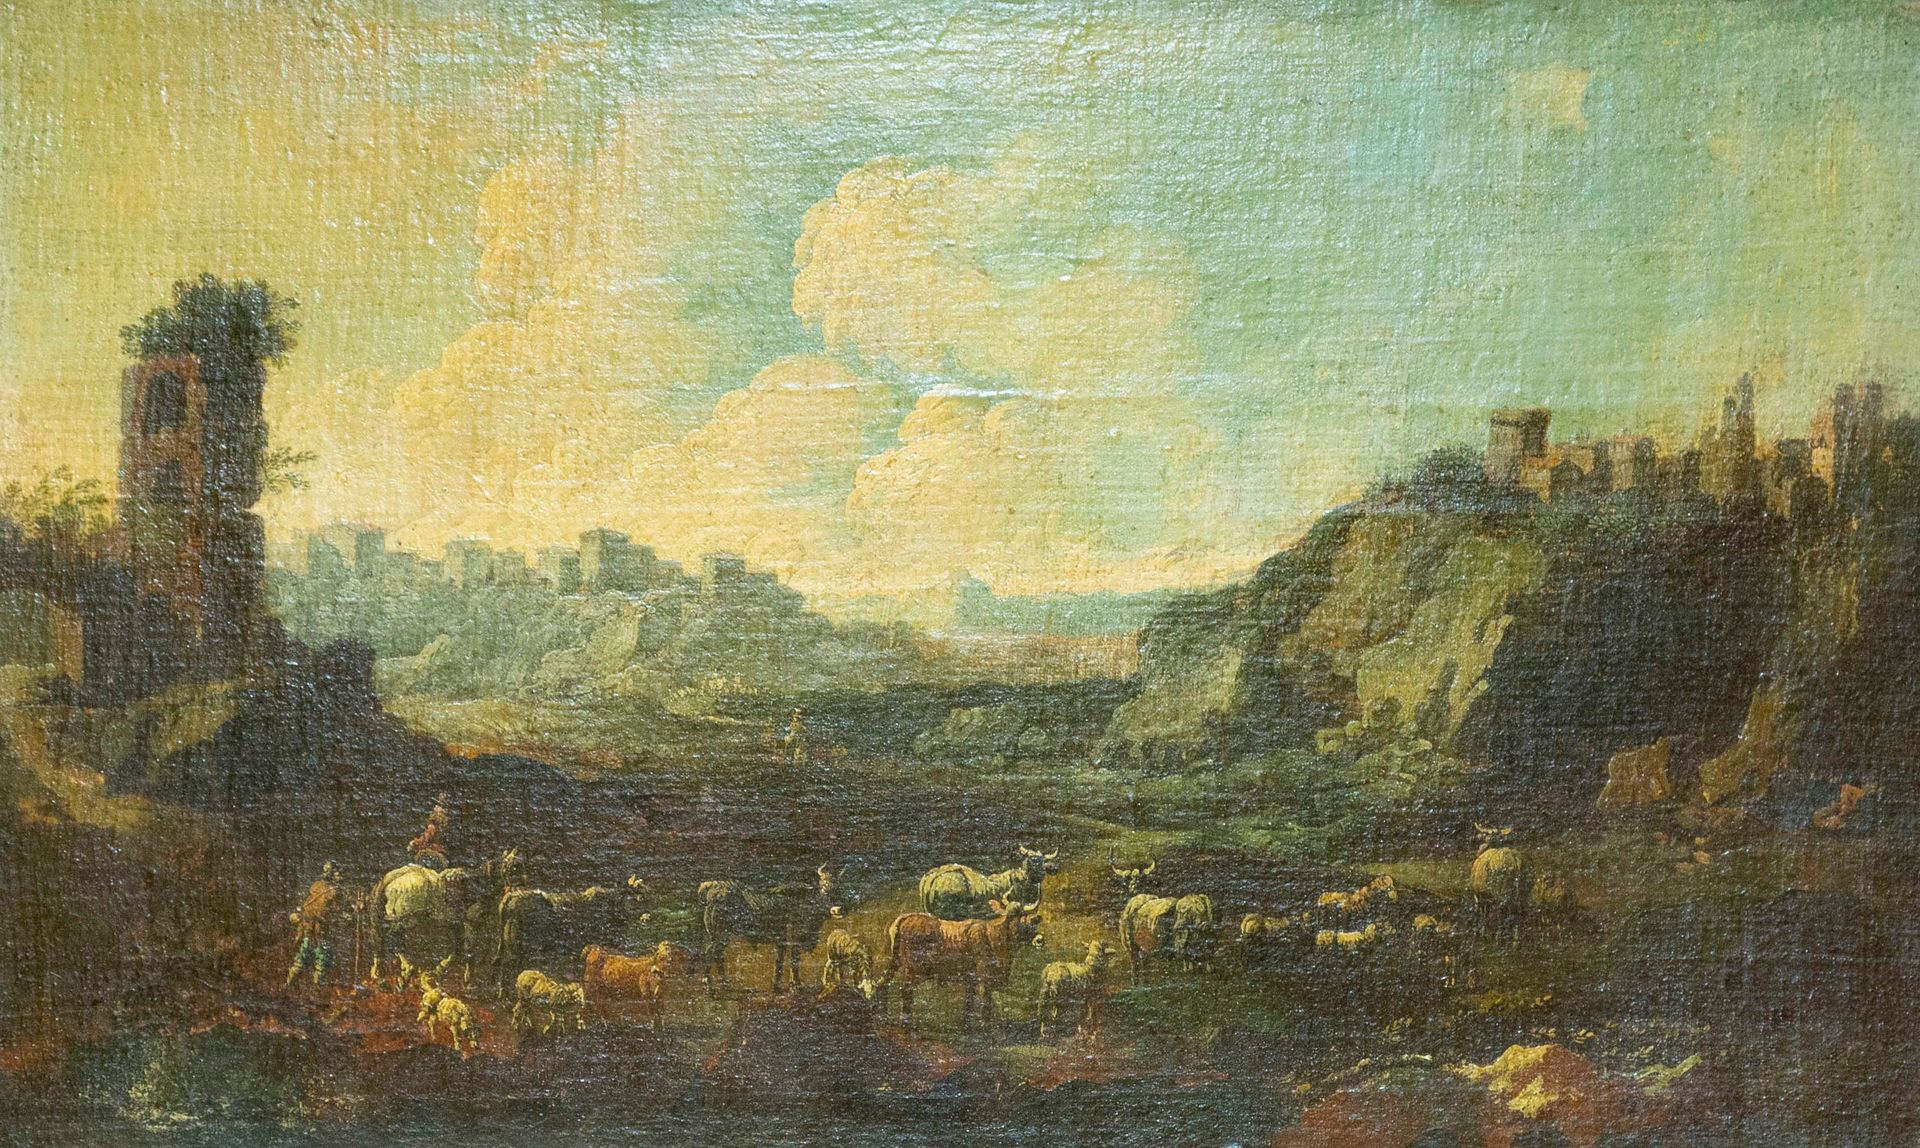 Null Attributed to Cajetan ROOS. "Grazing scene". Oil on canvas. 54x89cm.